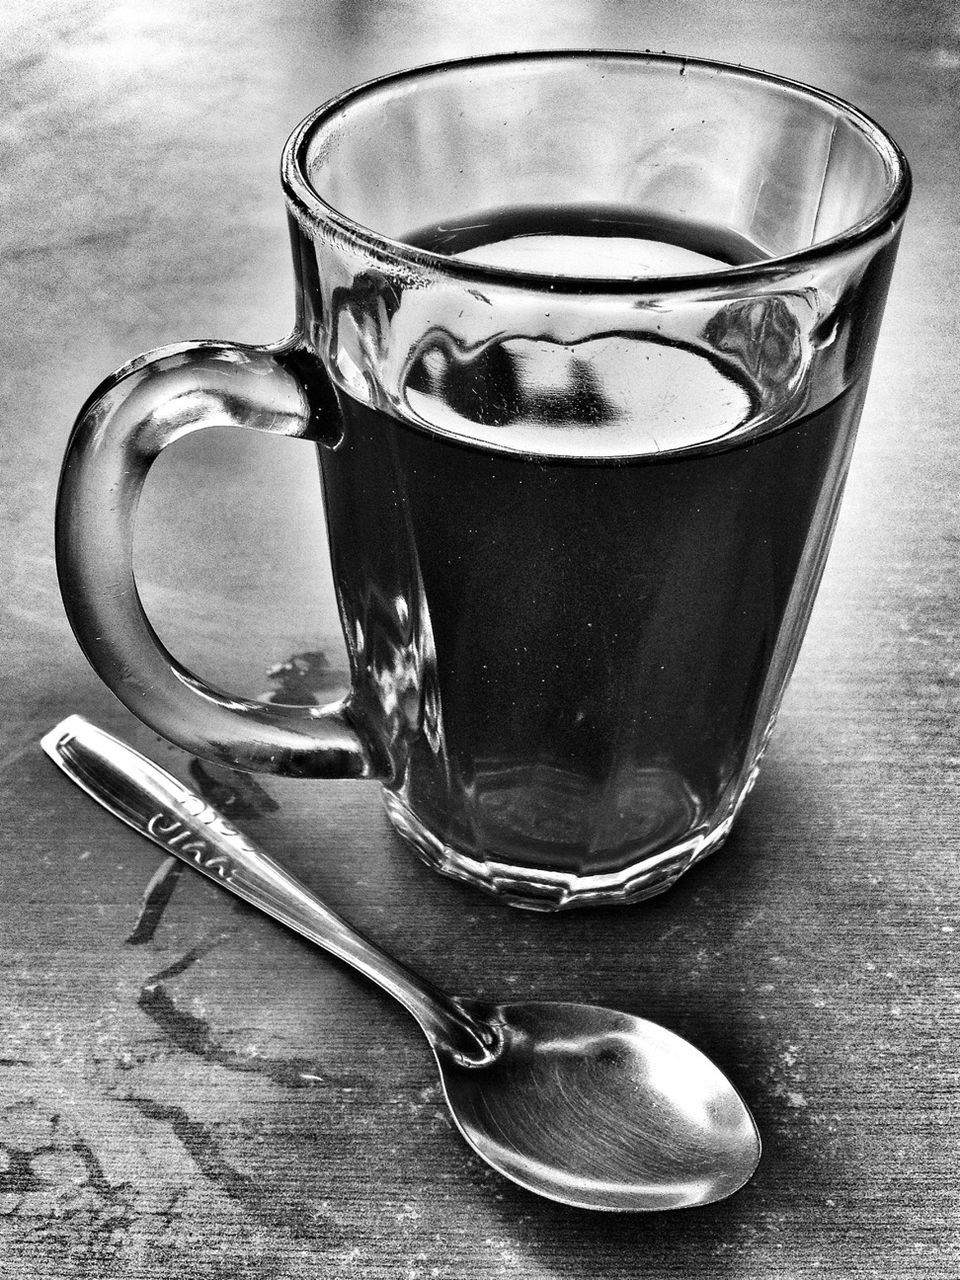 Mint tea and spoon on table